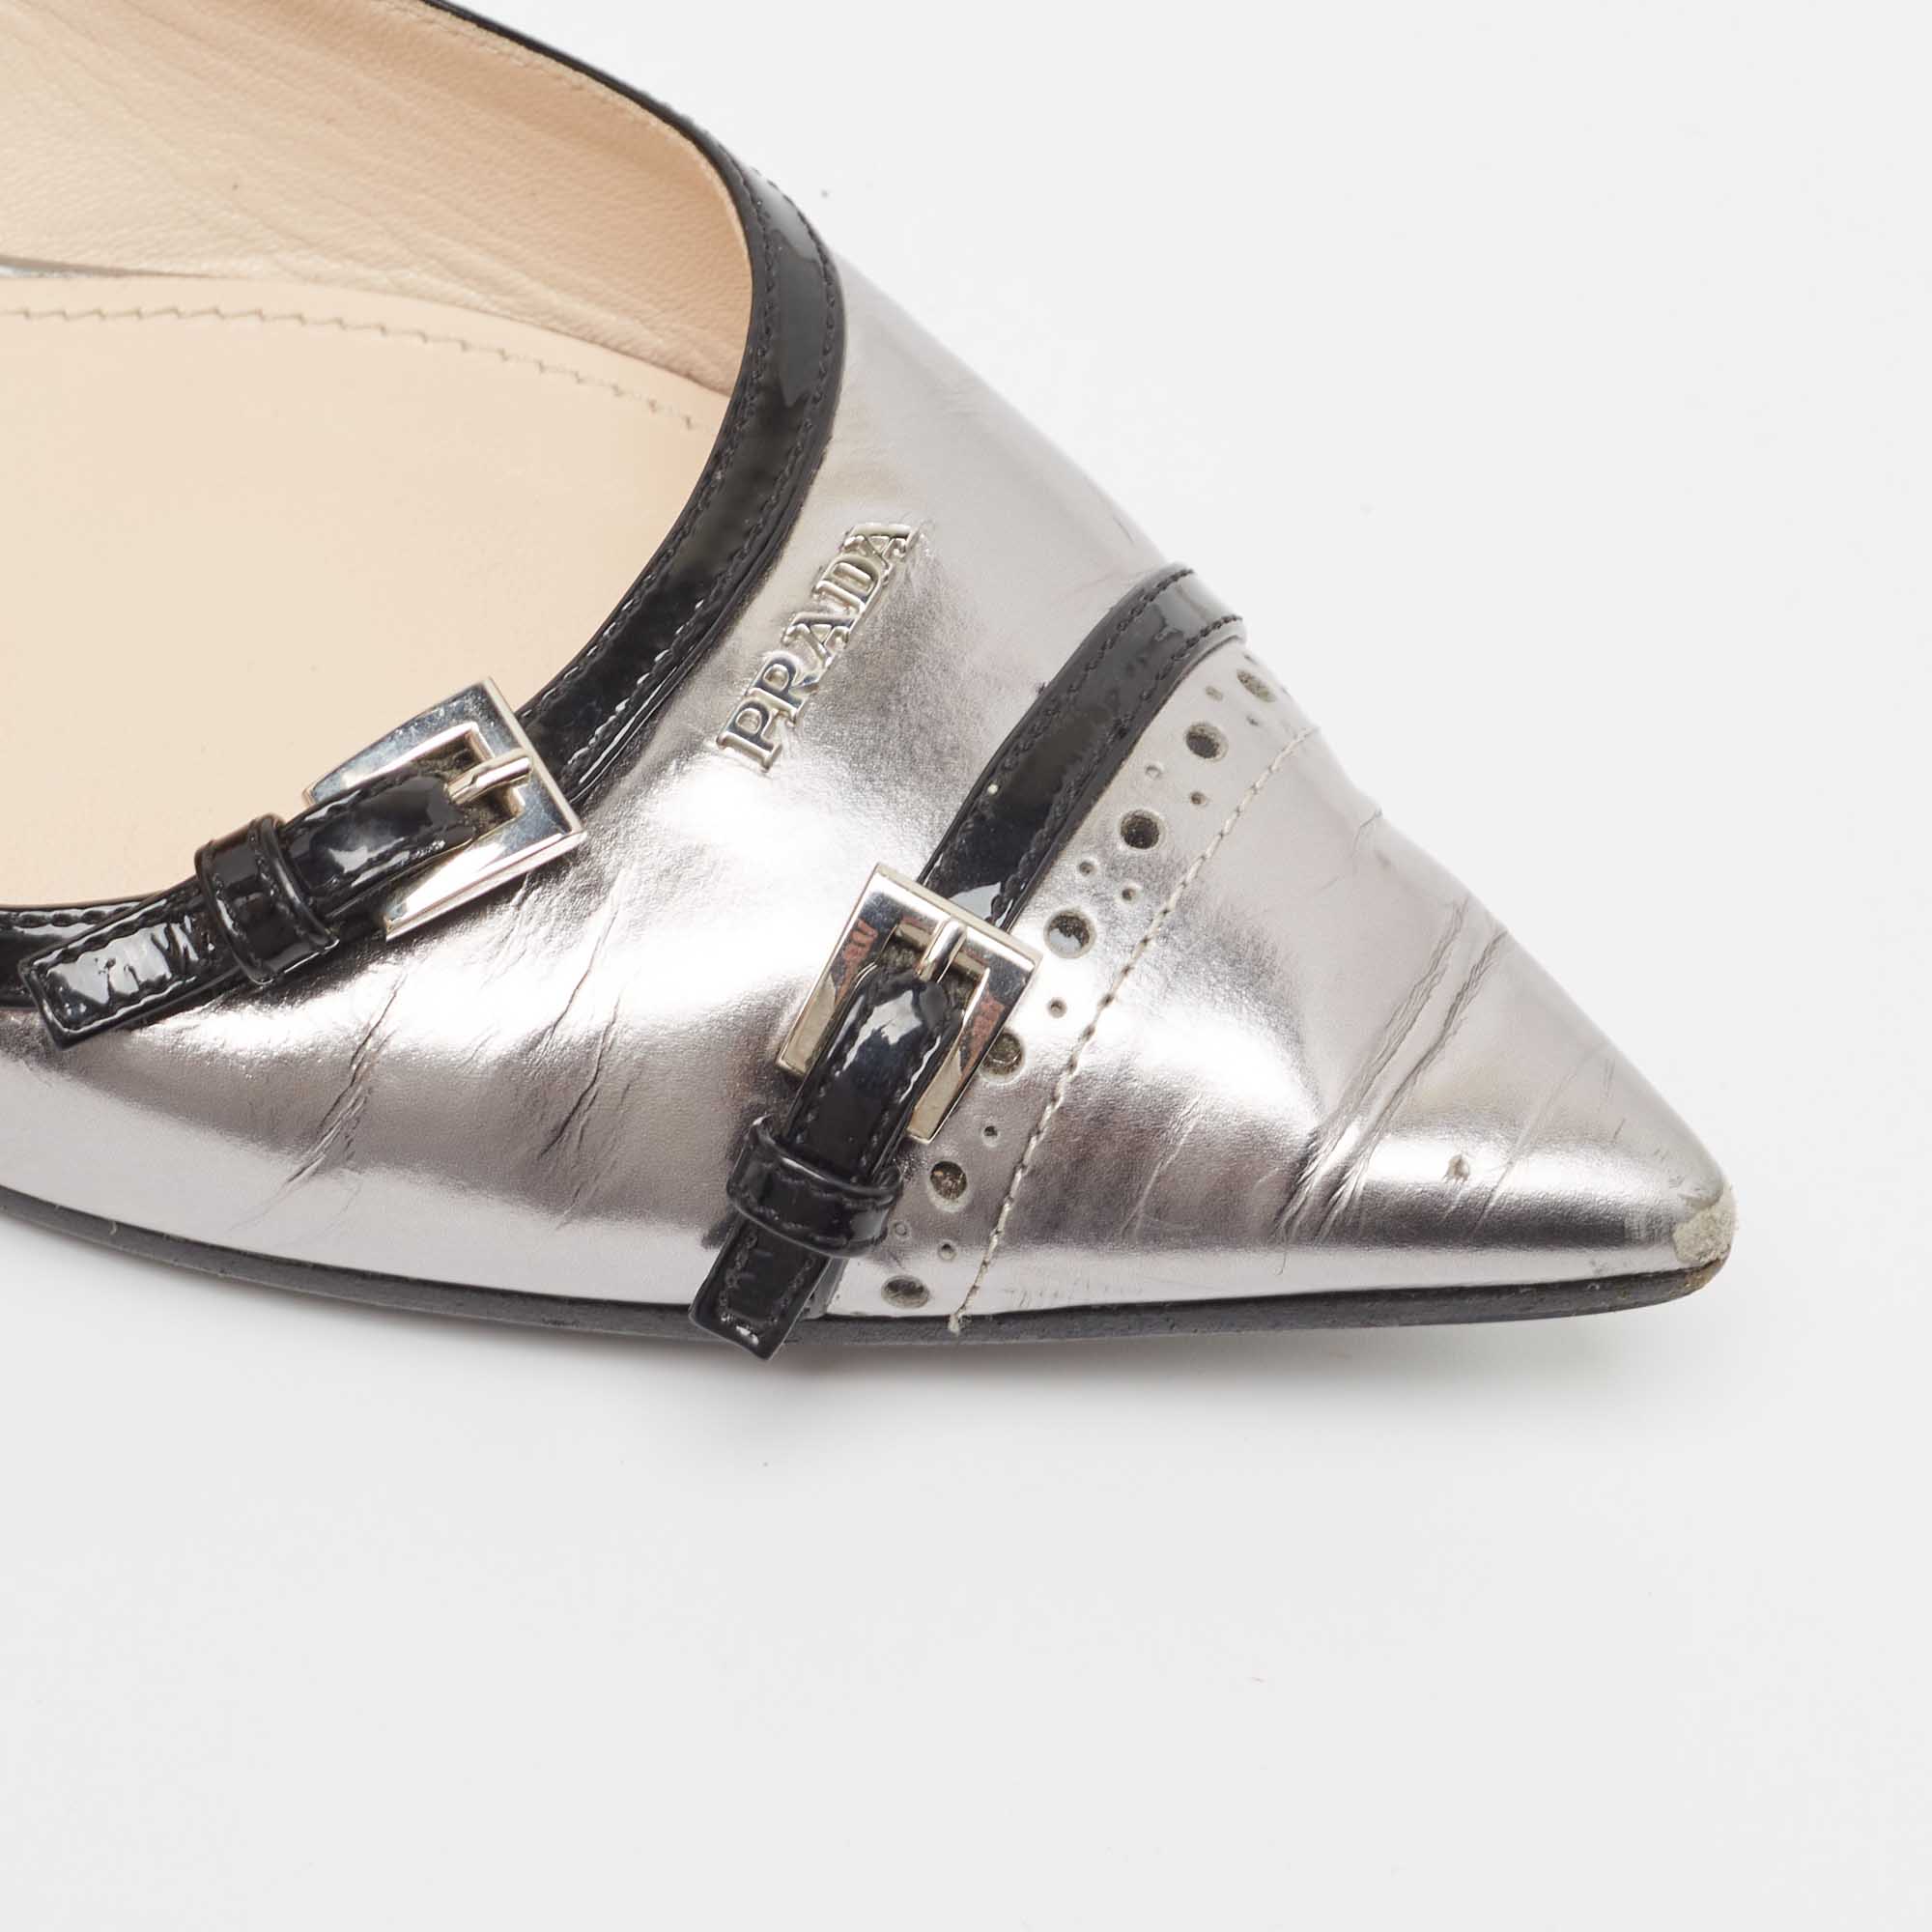 Prada Silver/Black Patent And Leather Buckle Detail Pointed Toe Ballet Flats Size 38.5